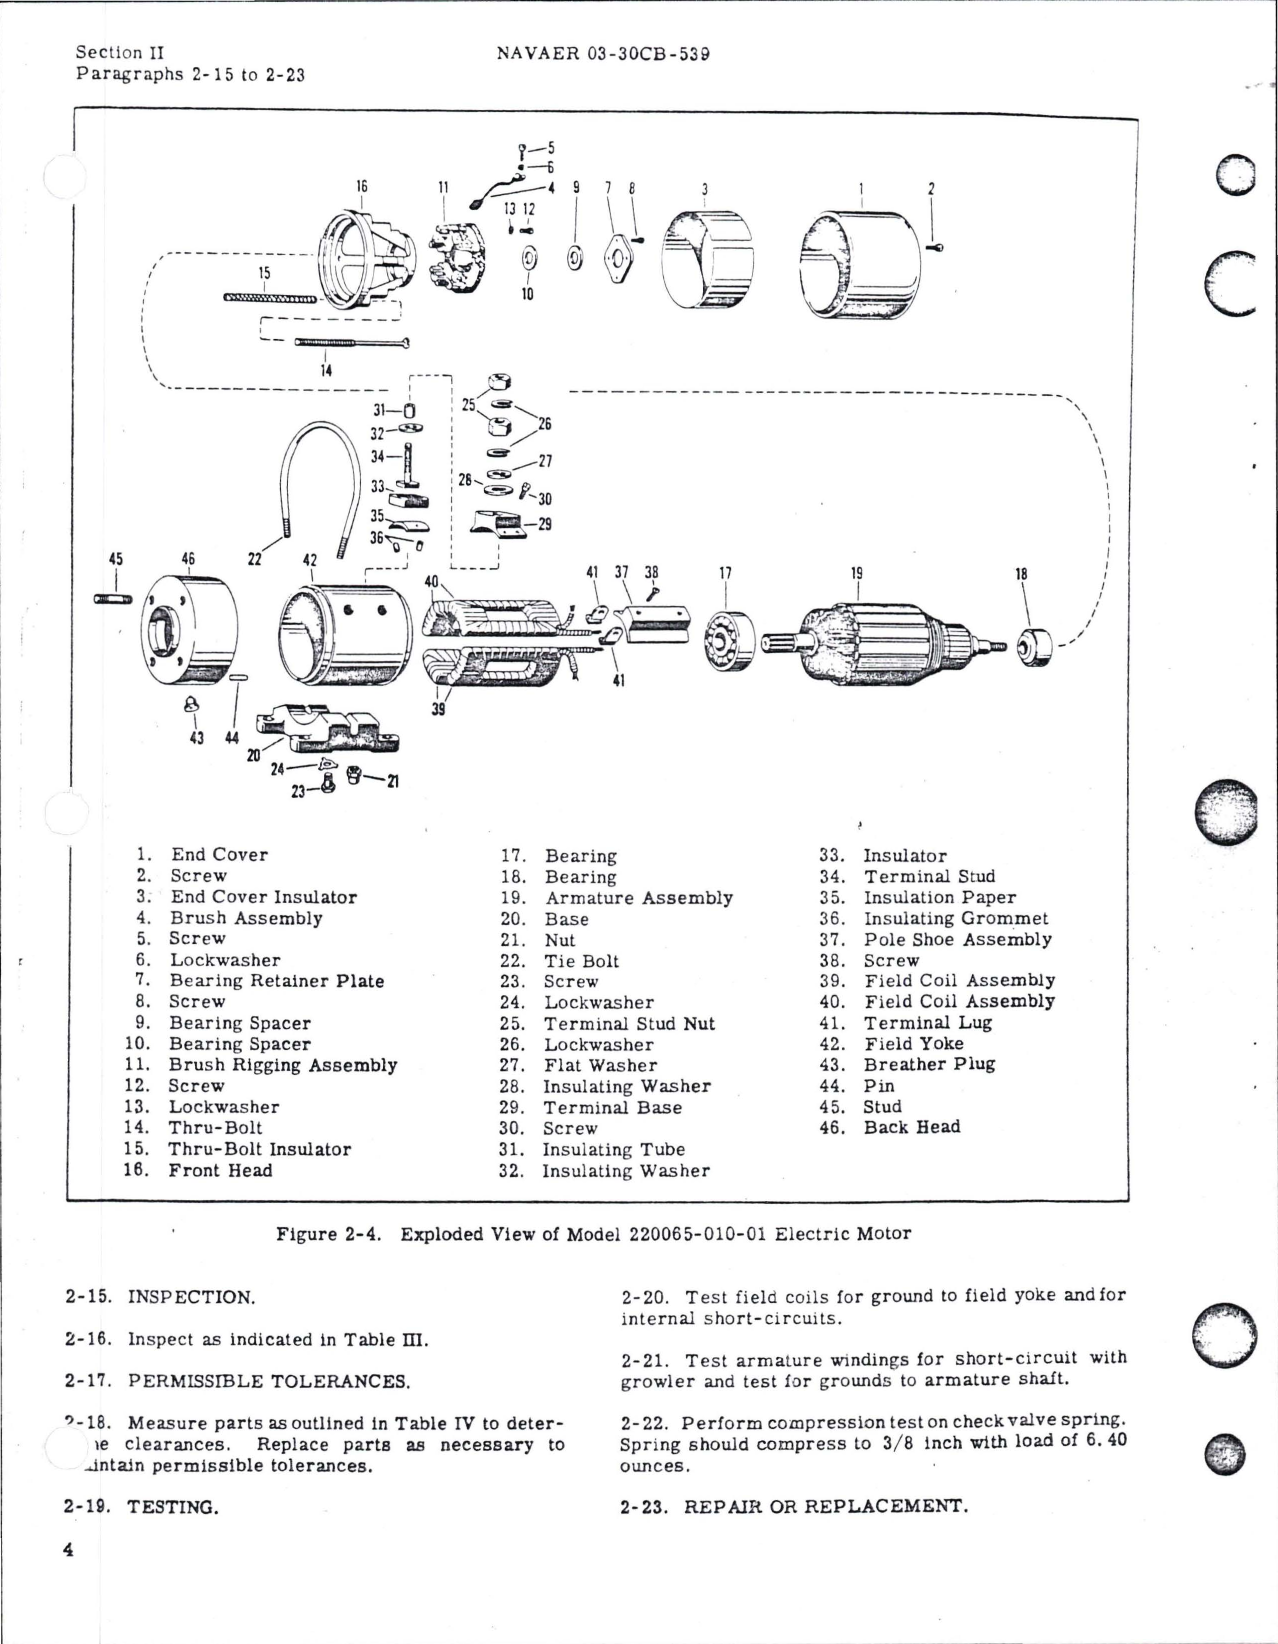 Sample page 7 from AirCorps Library document: Overhaul Instructions for Elect Motor Driven Hydraulic Gear Type Pump - 111069 Series